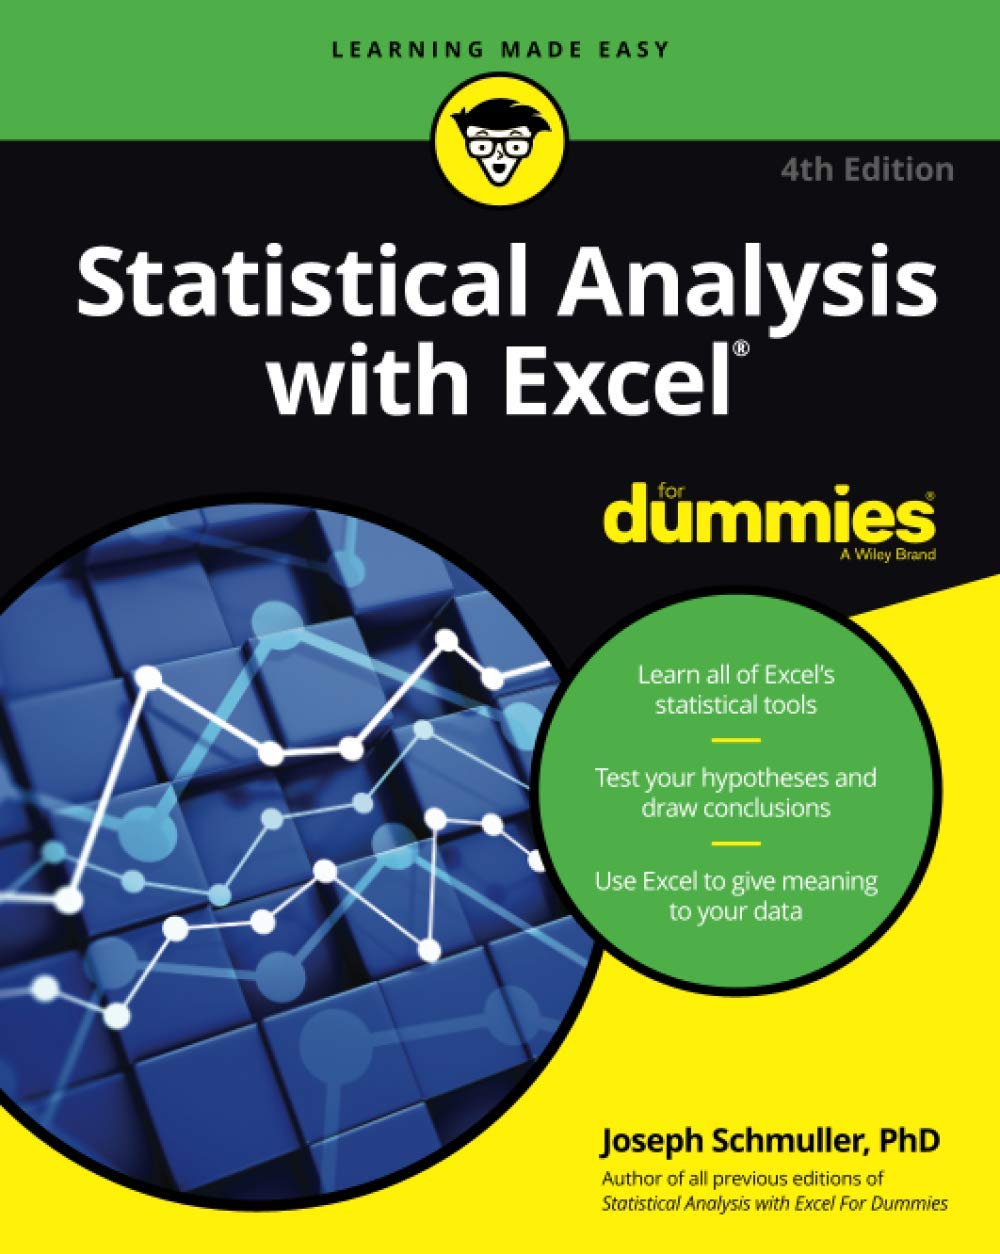 Statistical Analysis with Excel For Dummies, 4th Edition